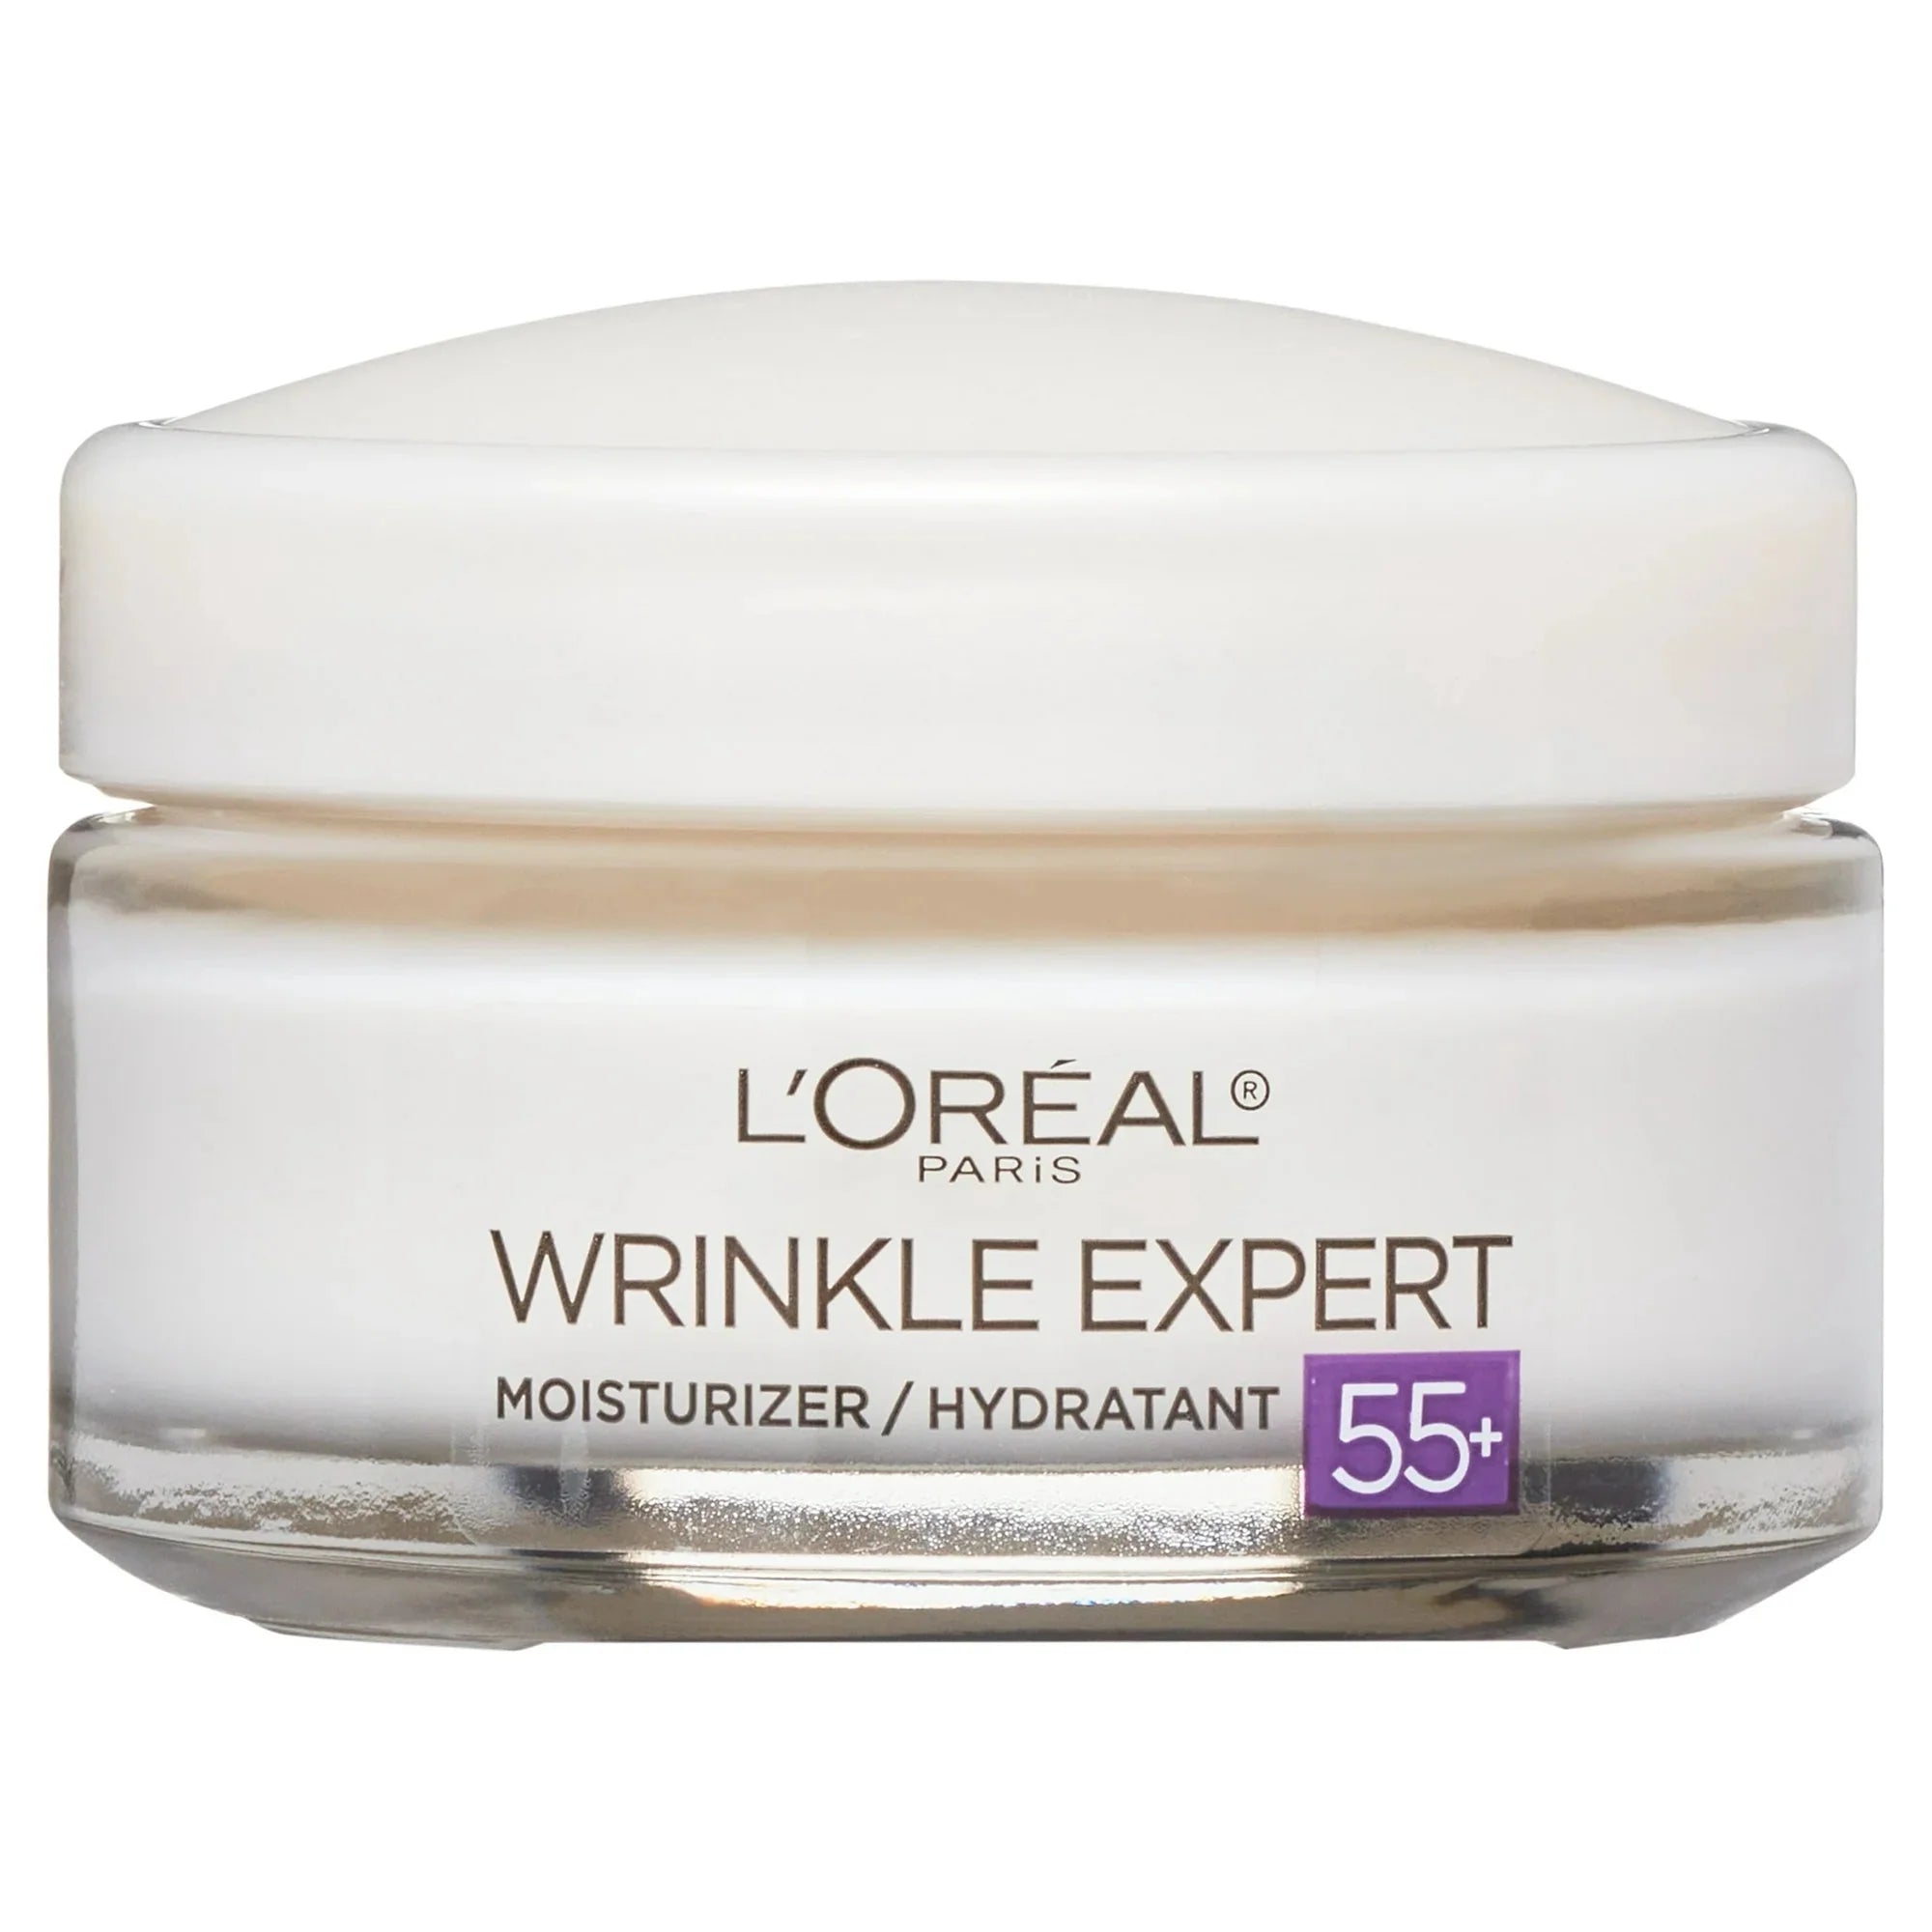 Wholesale prices with free shipping all over United States L'Oreal Paris Wrinkle Expert Face Moisturizer, 1.7 oz - Steven Deals